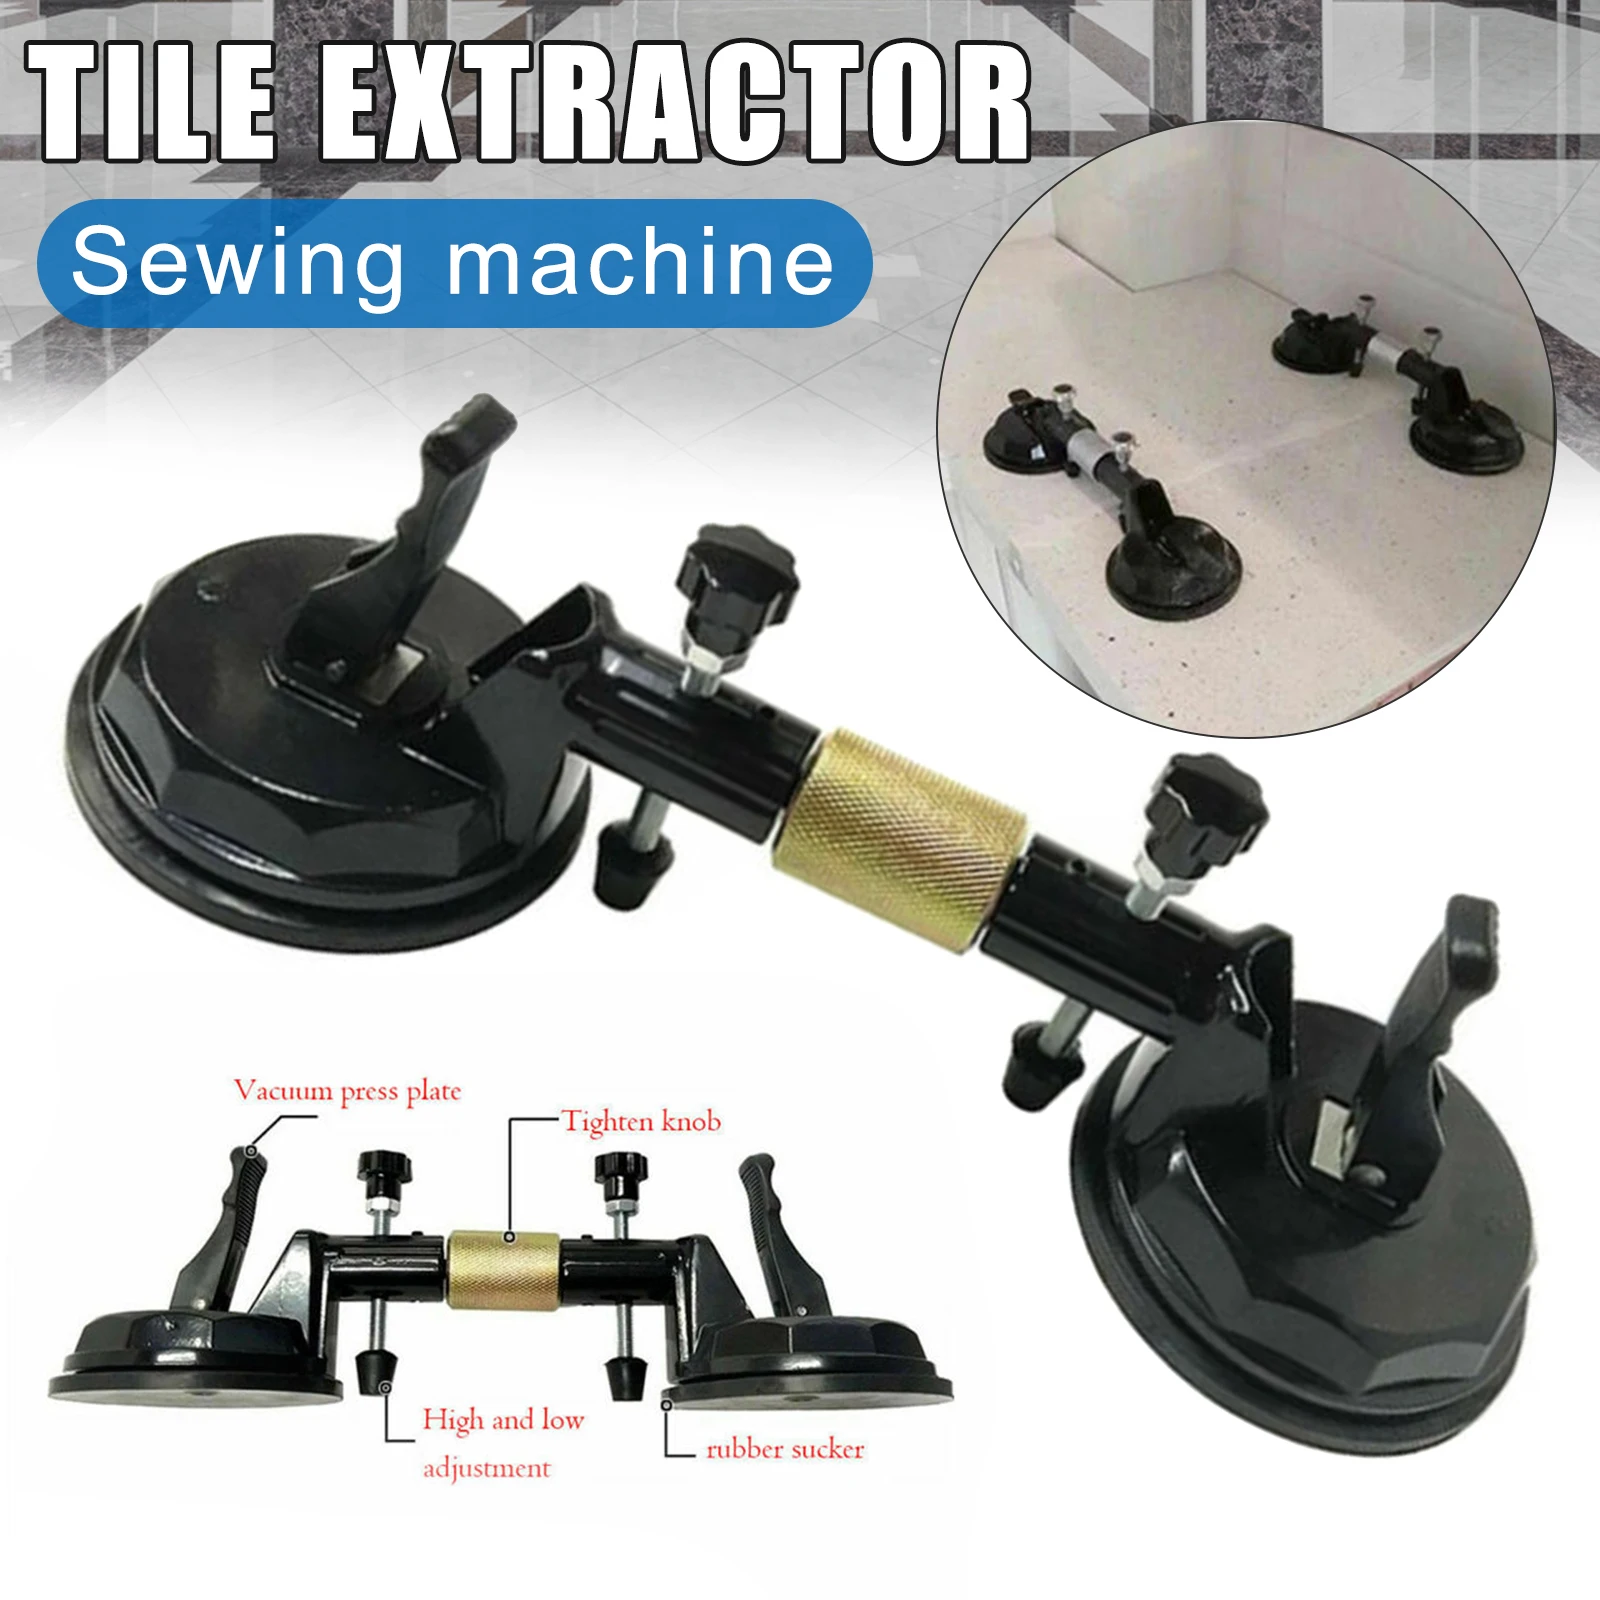 Adjustable Suction Cup Stone Seam Setter for Pulling and Aligning Tiles Flat Surfaces   Construction Facility Parts Hand Tools